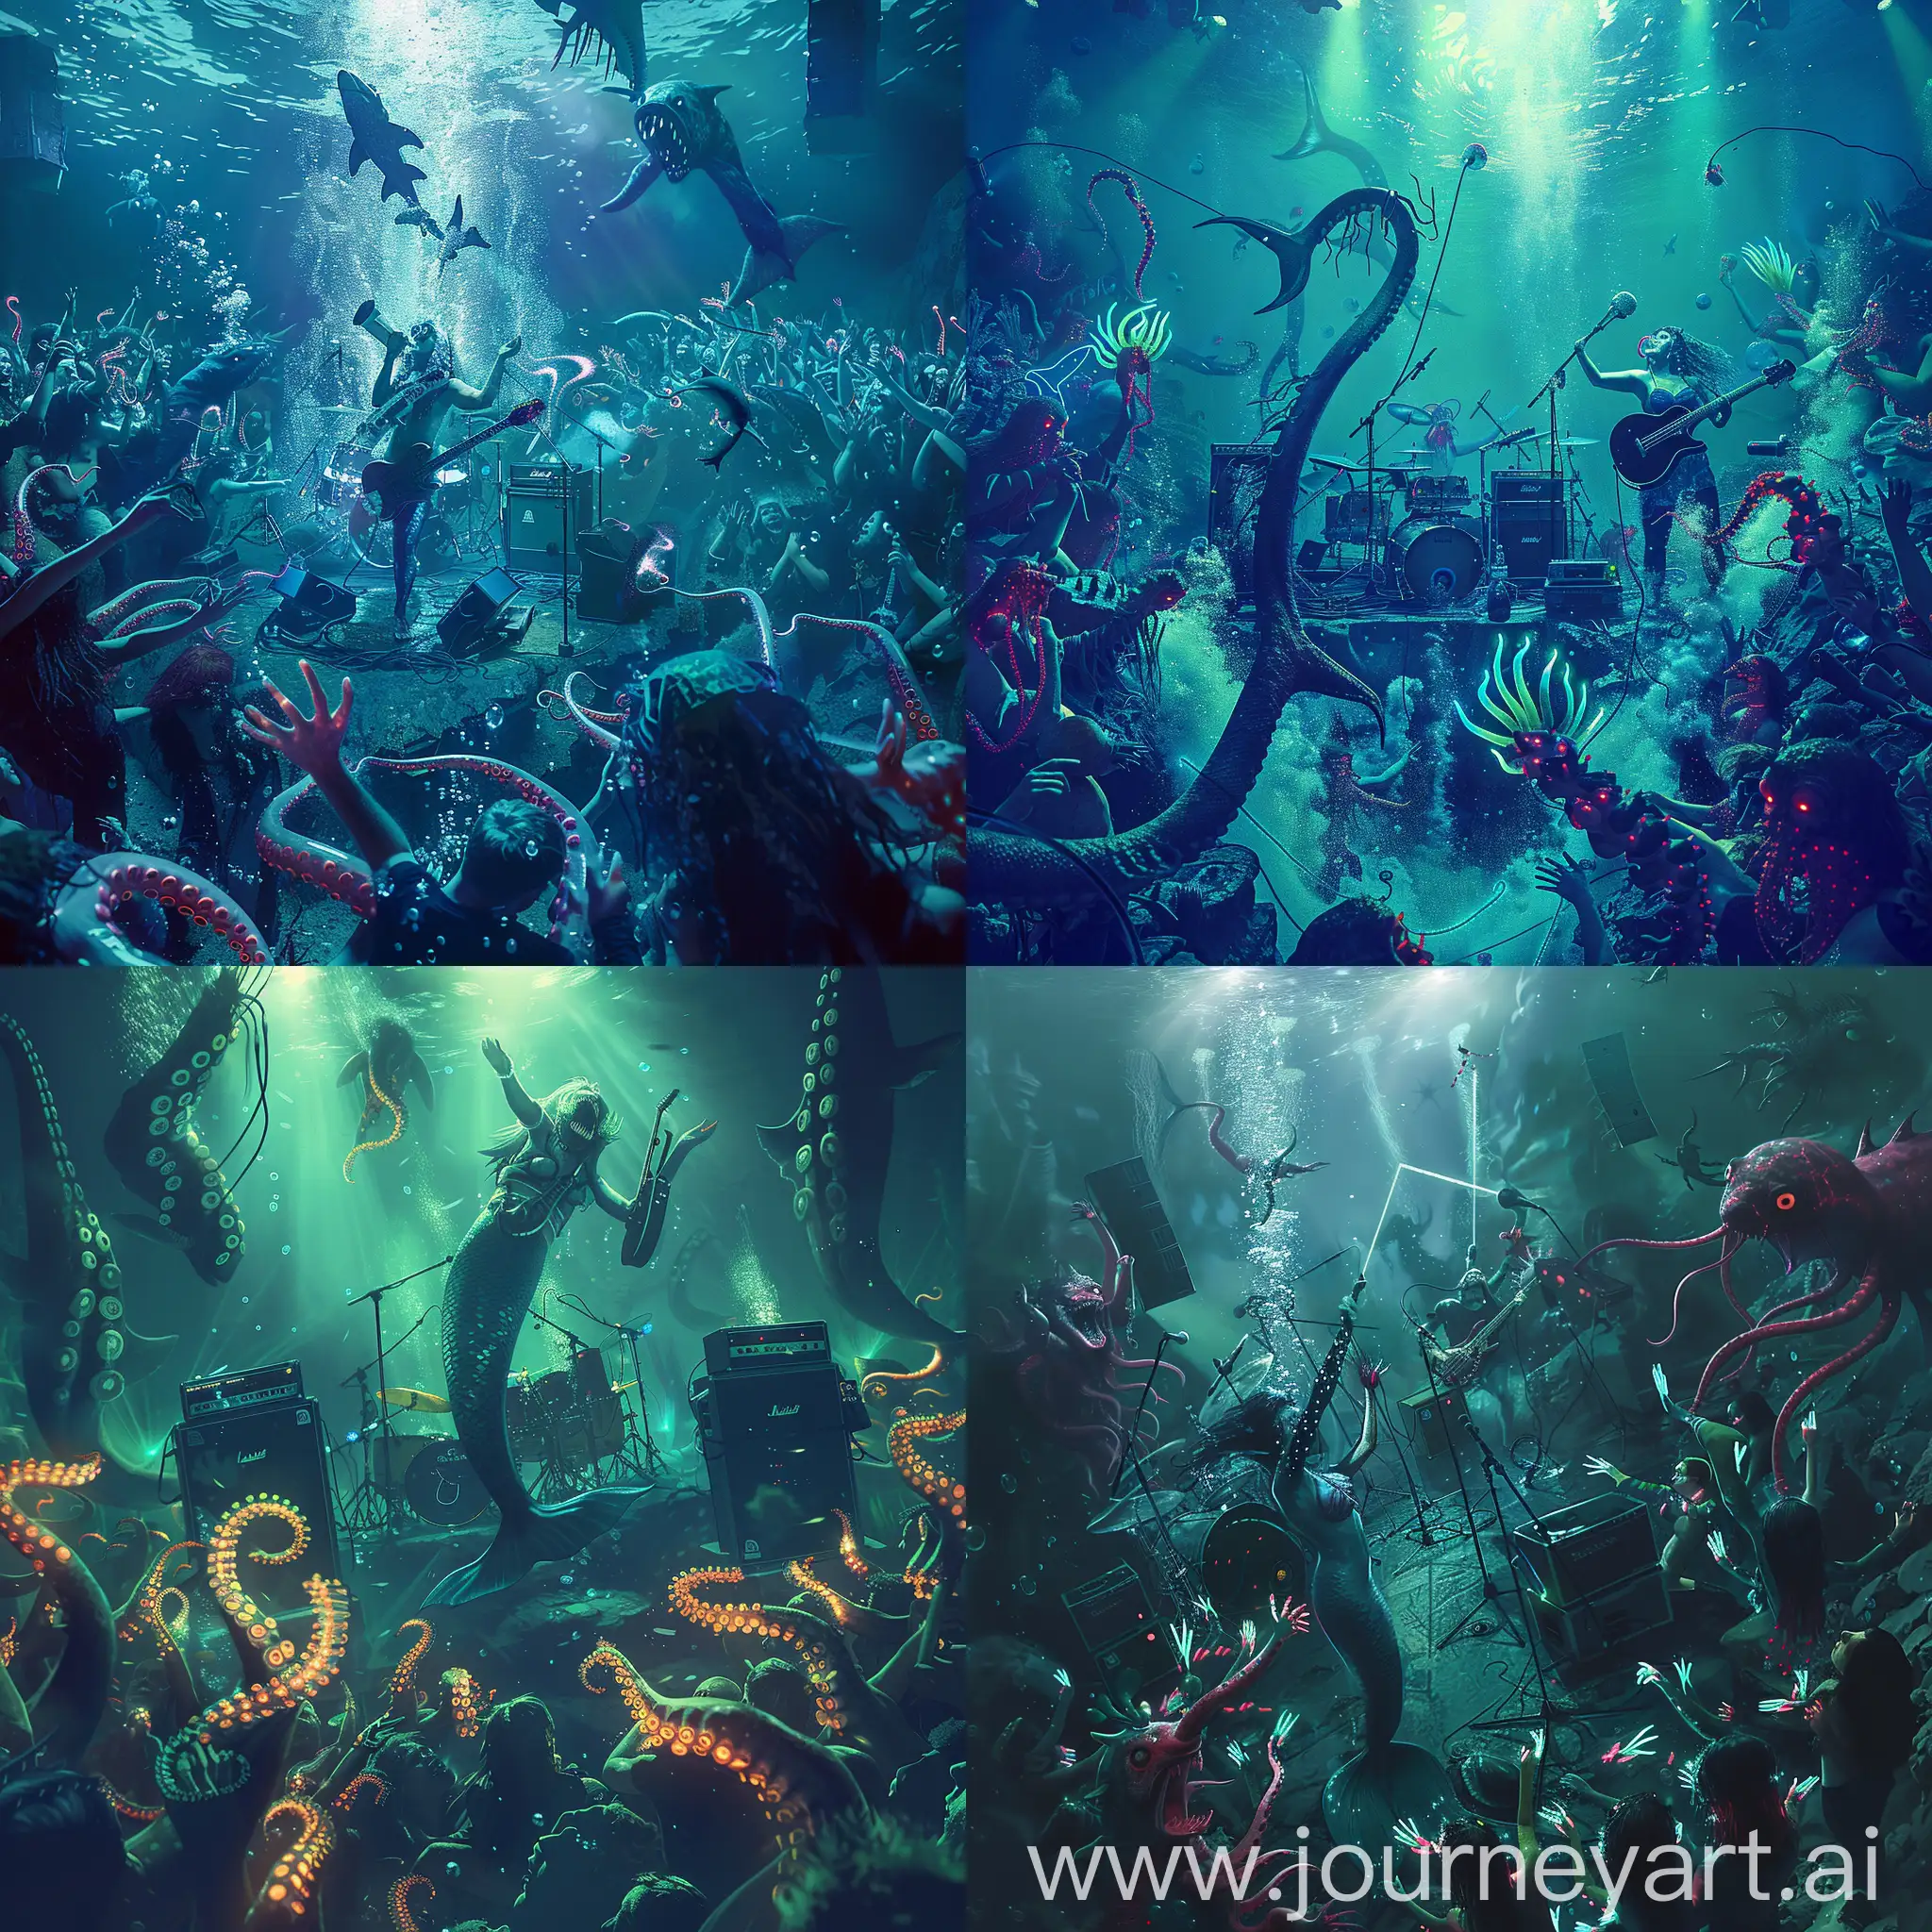 Mermaid-Punk-Band-Rocks-Underwater-Concert-with-Electric-Eels-and-Glowing-Tentacles